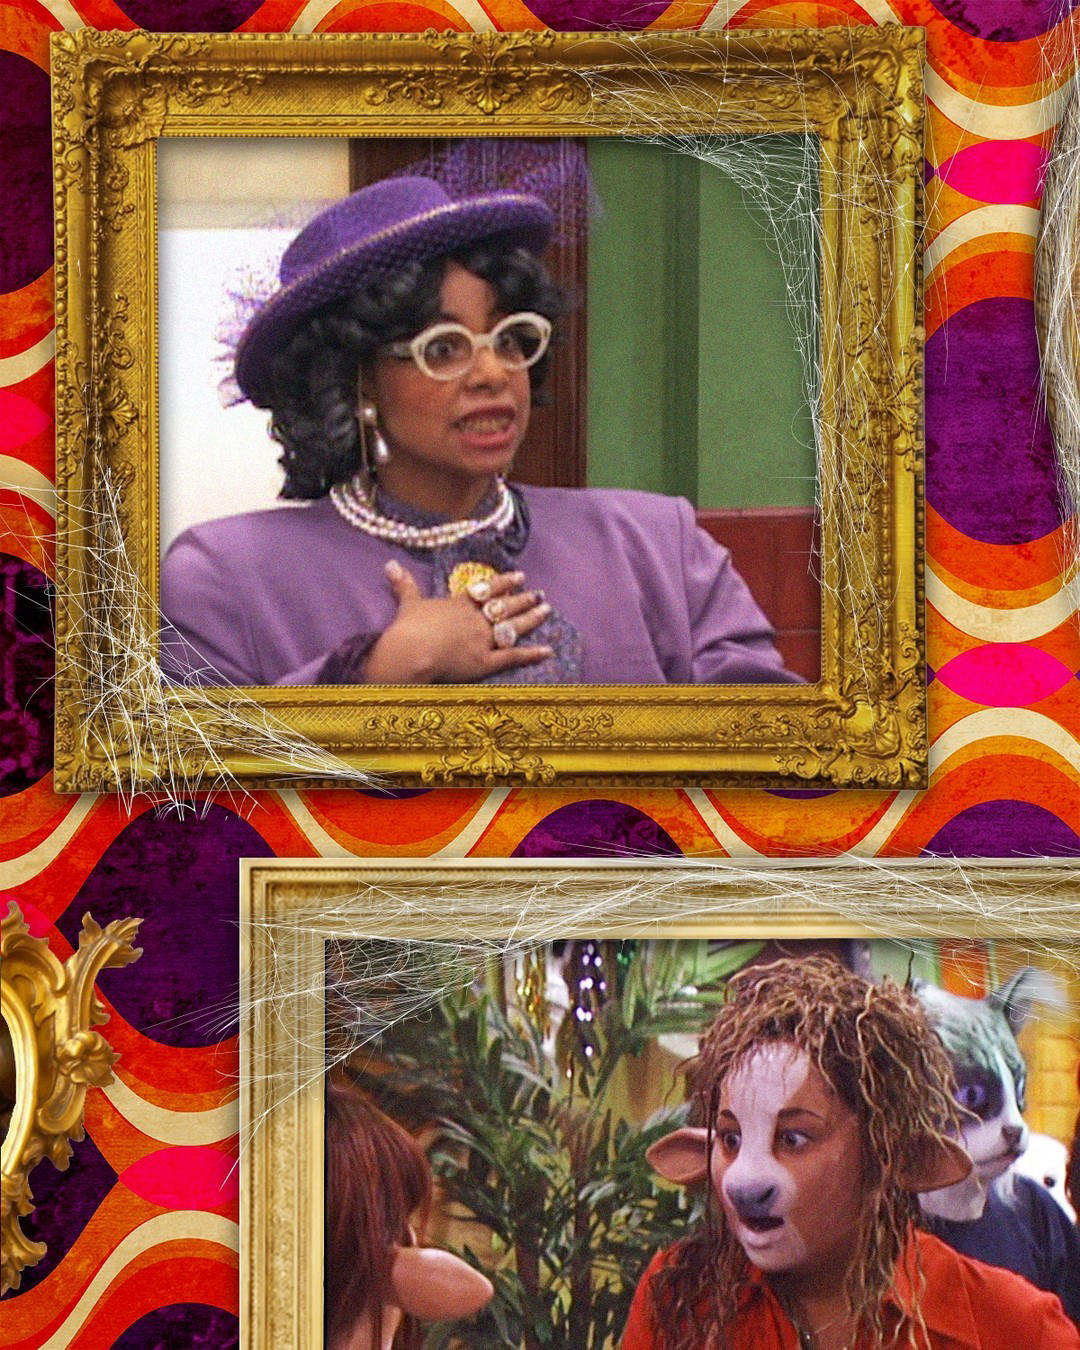 Disney - Raven Baxter could win any costume contest, even on Halloween